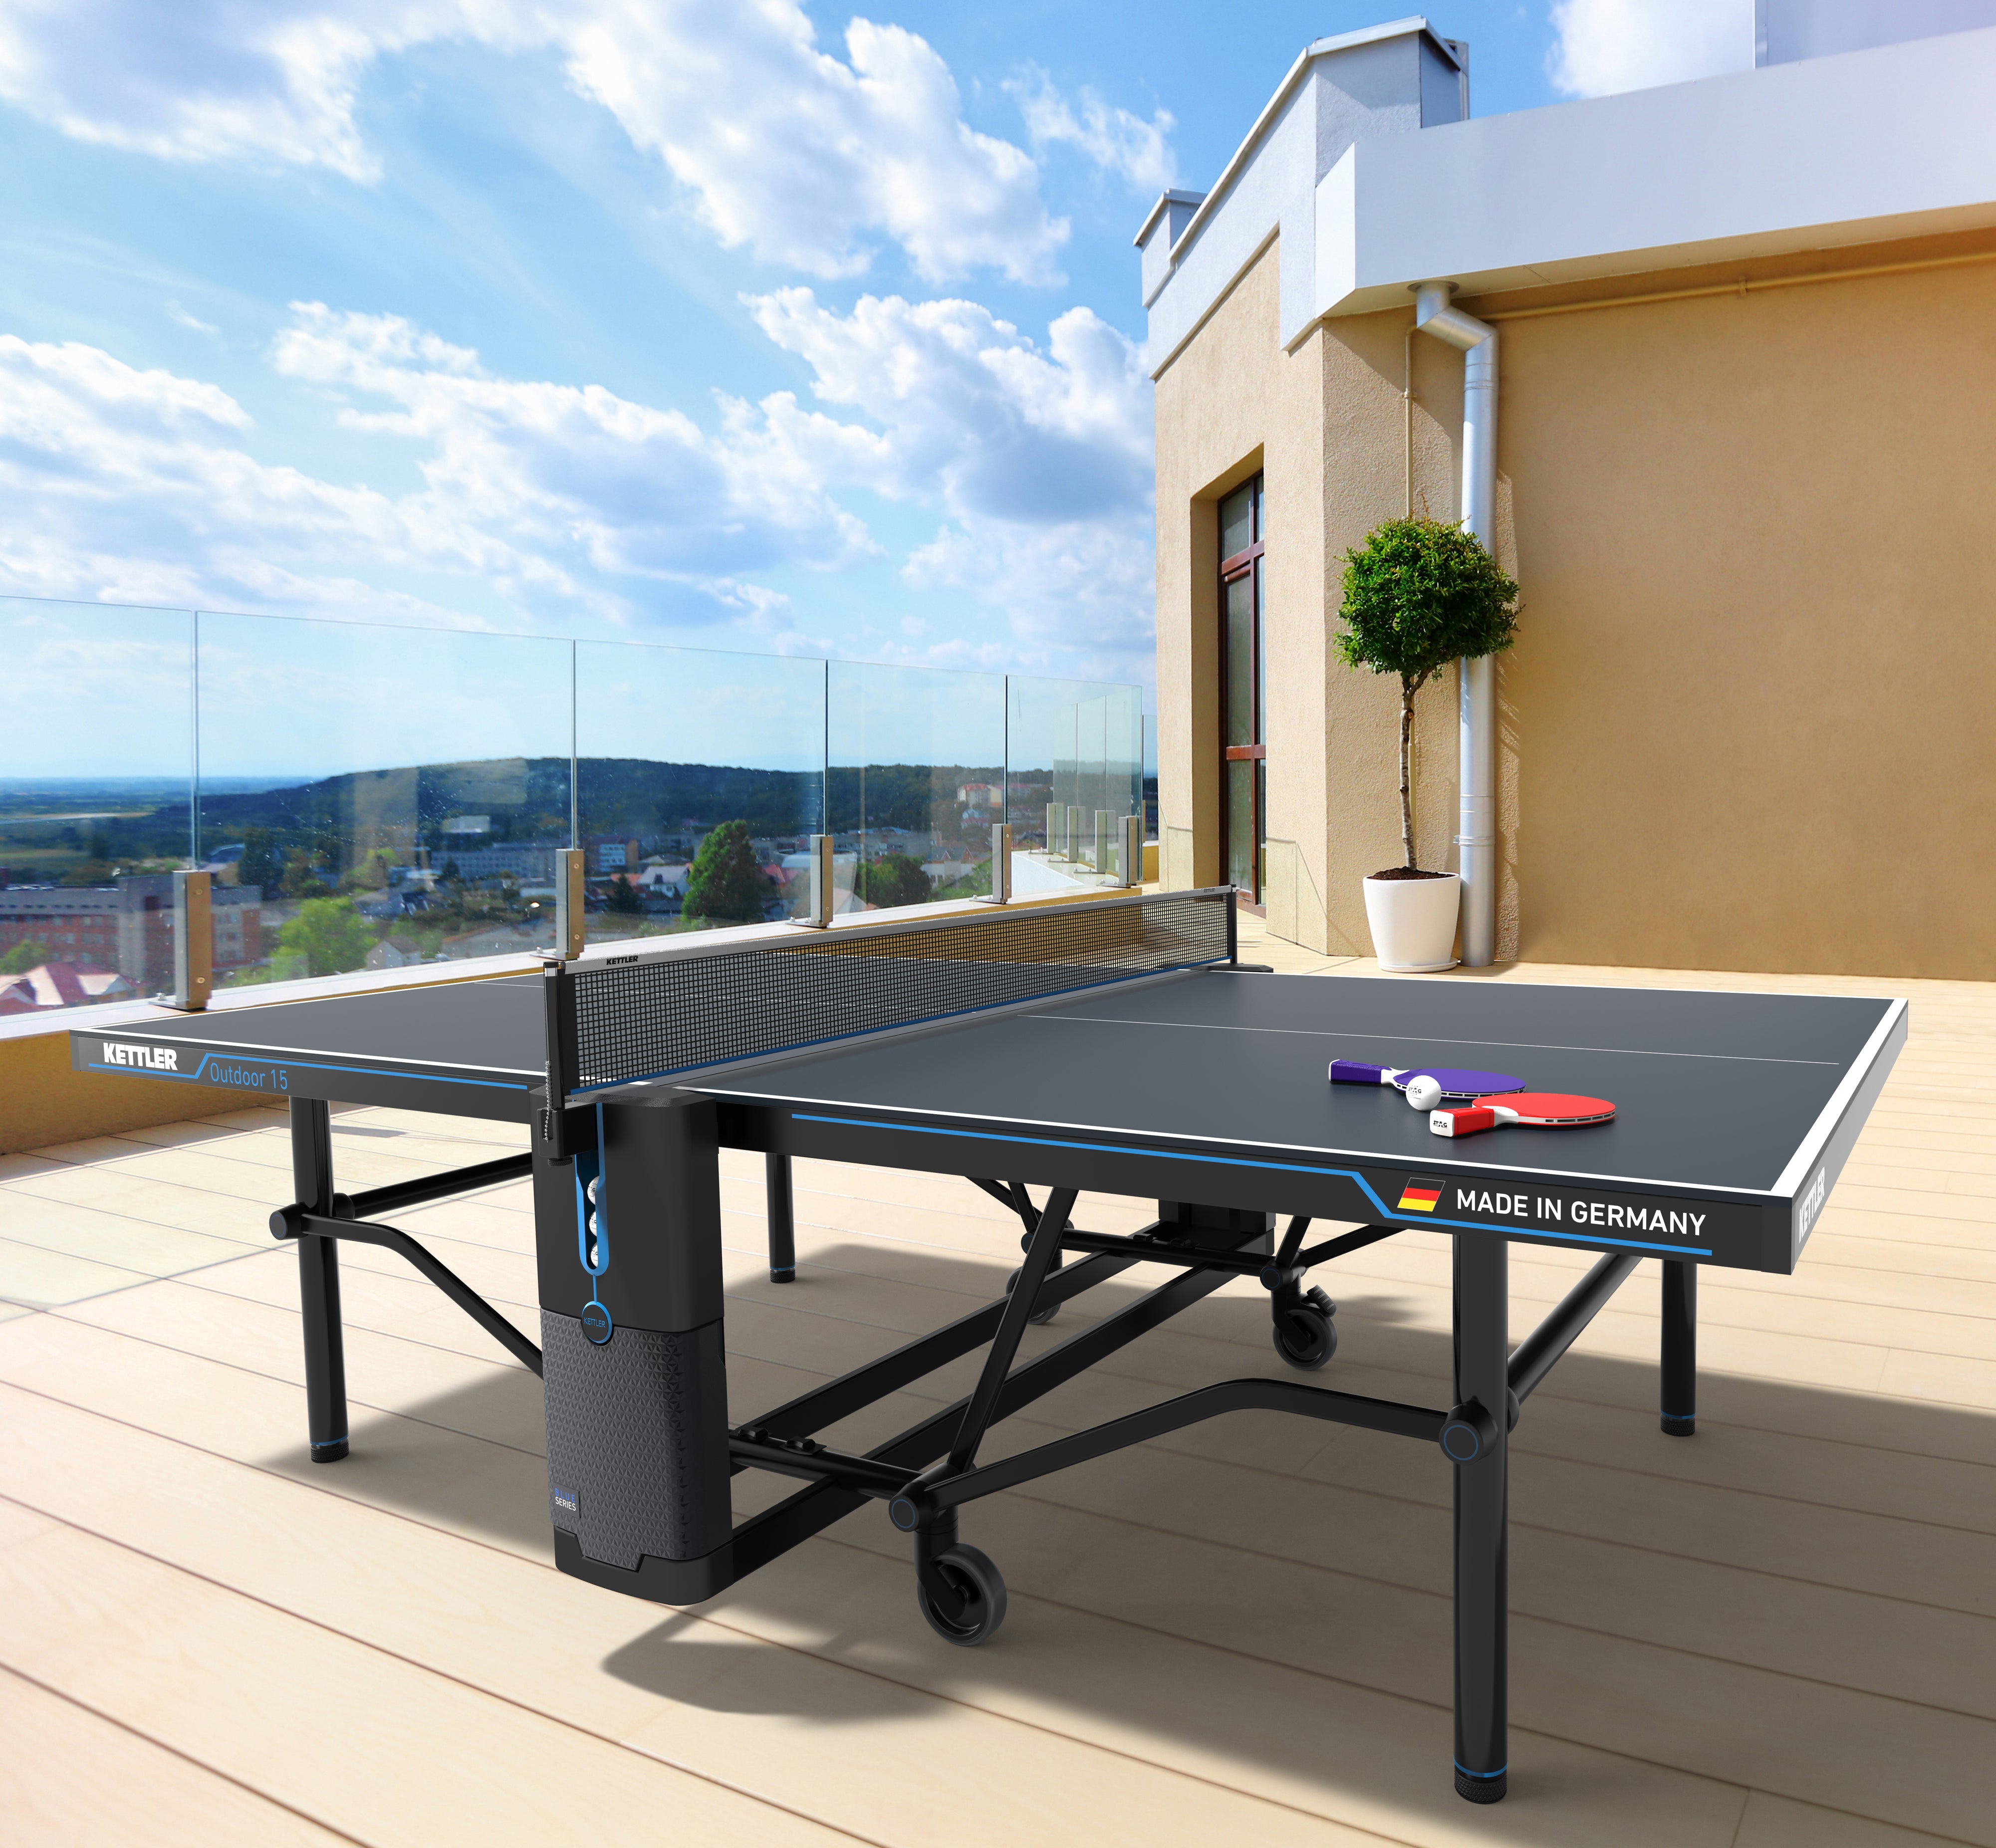 pre assembled outdoor table tennis table in commercial rooftop setting